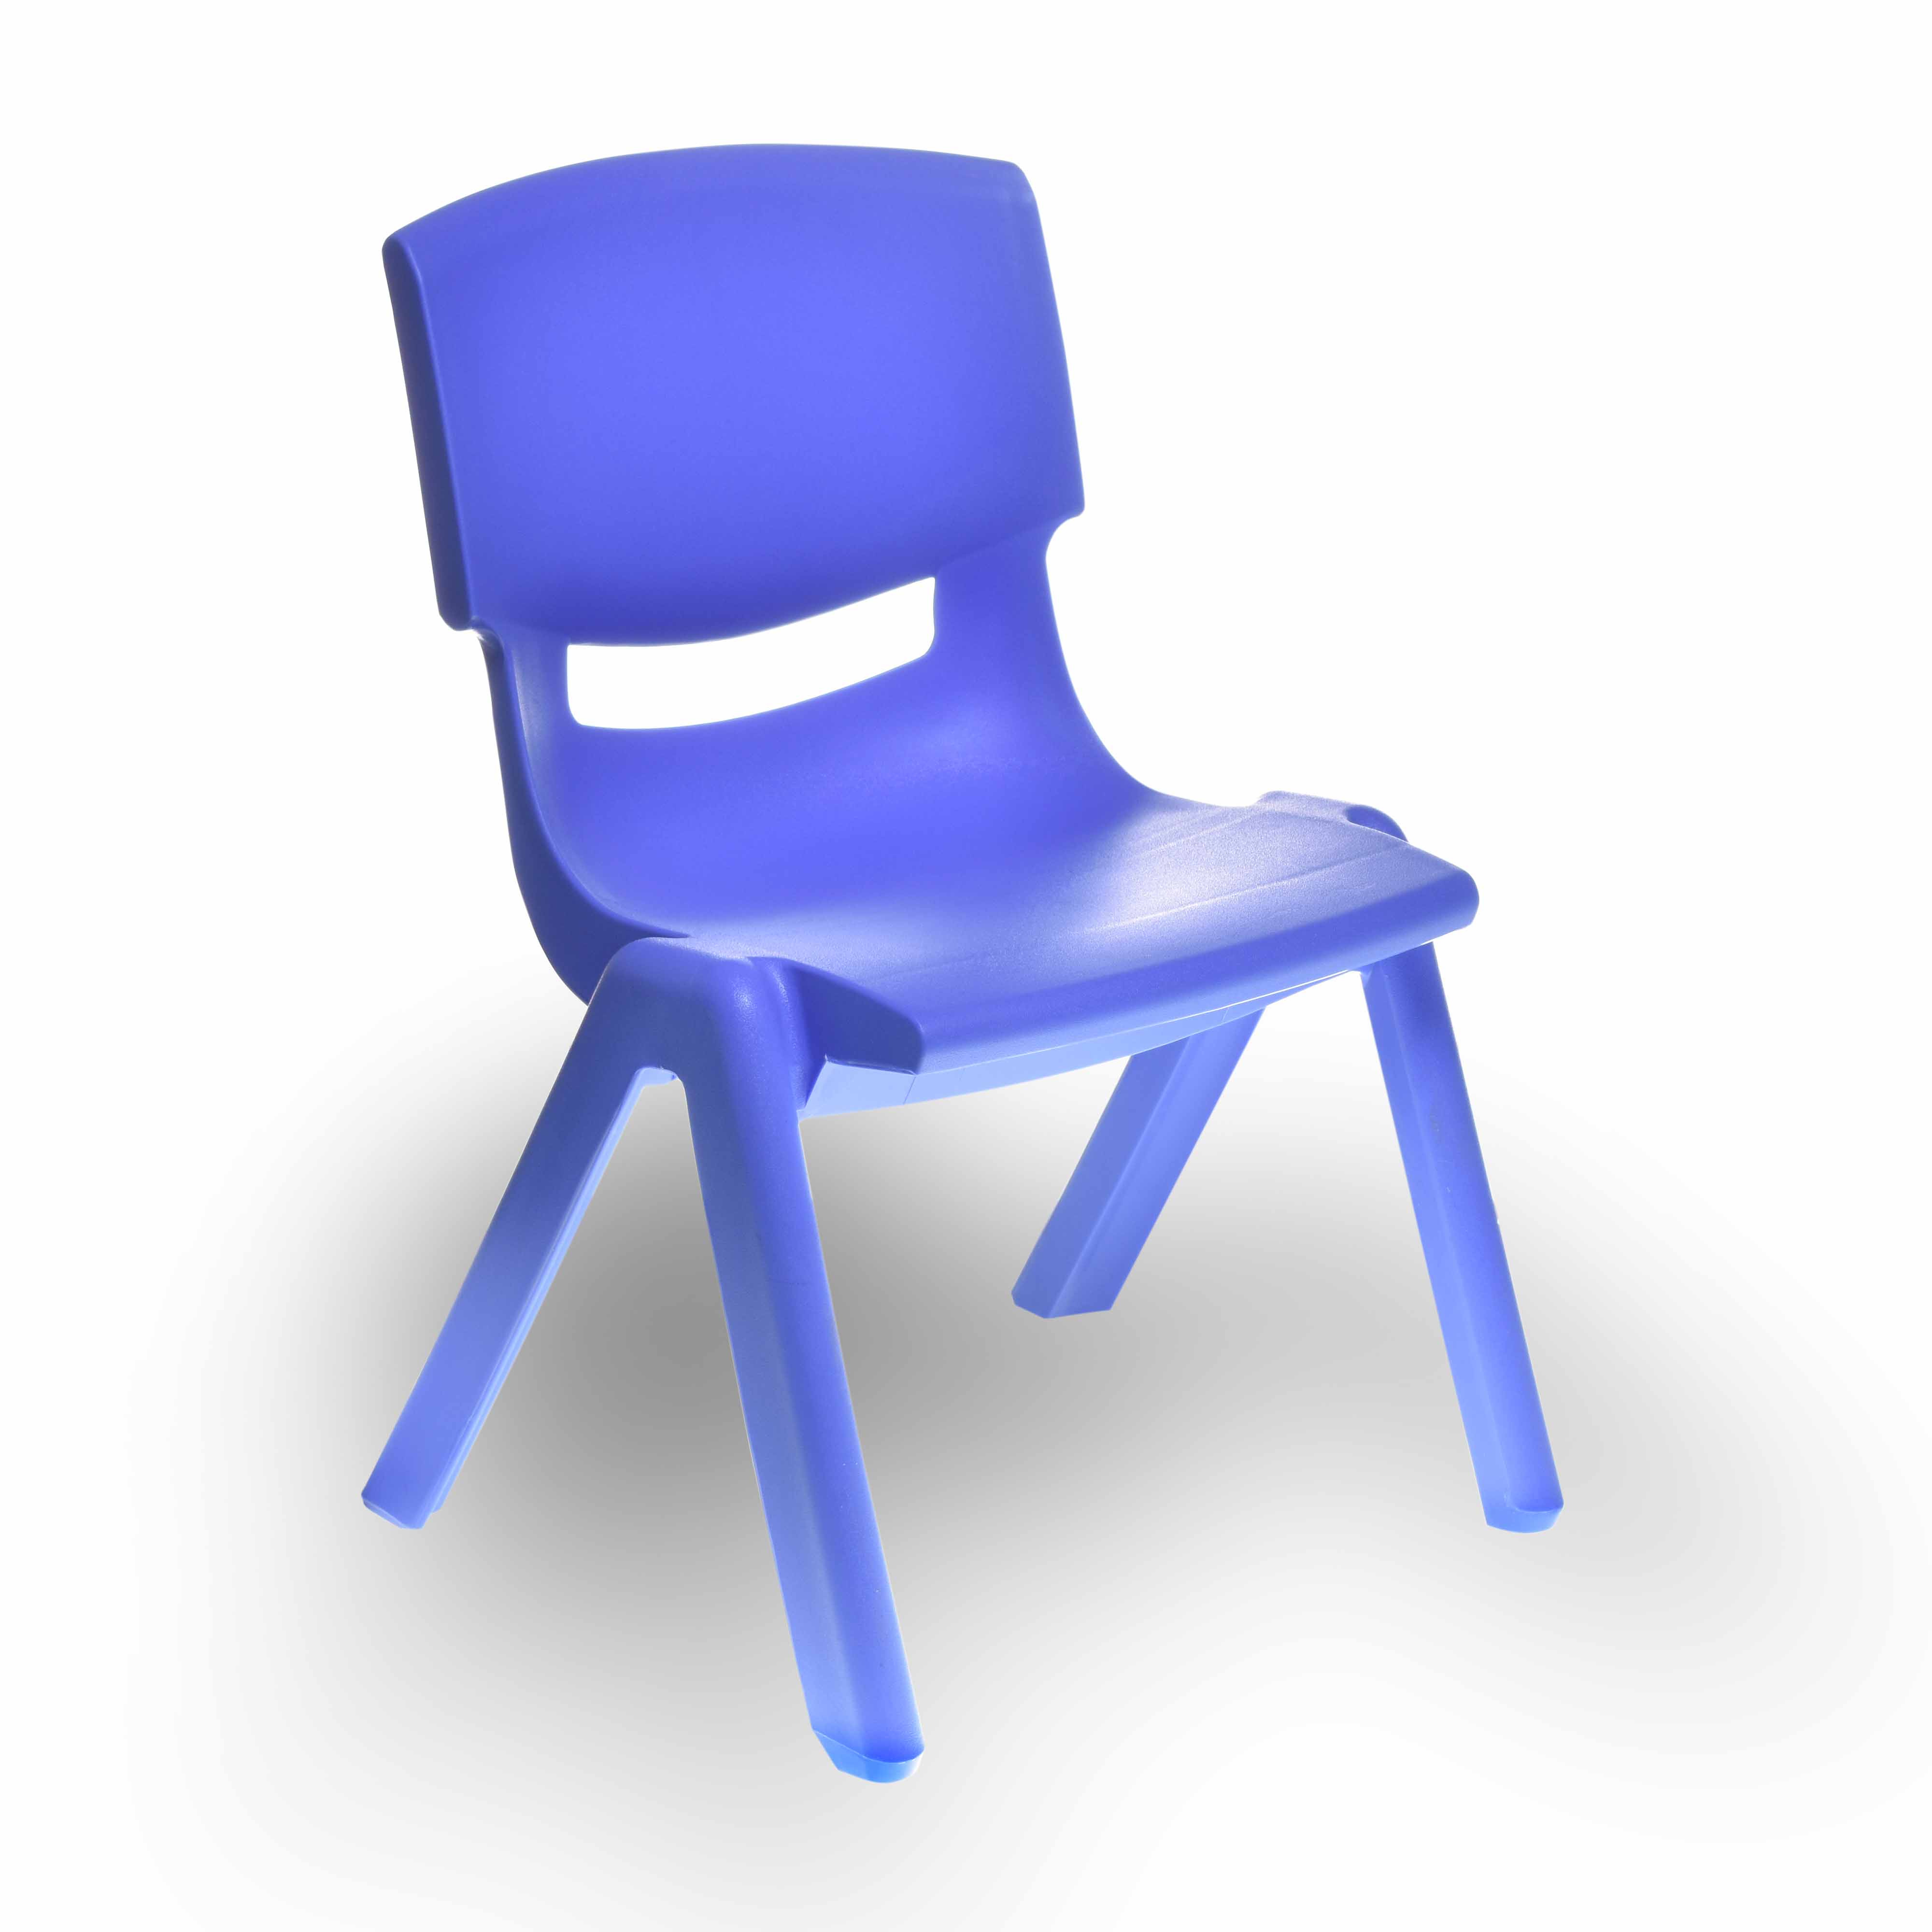 Kidicare - Stackable Plastic Chairs